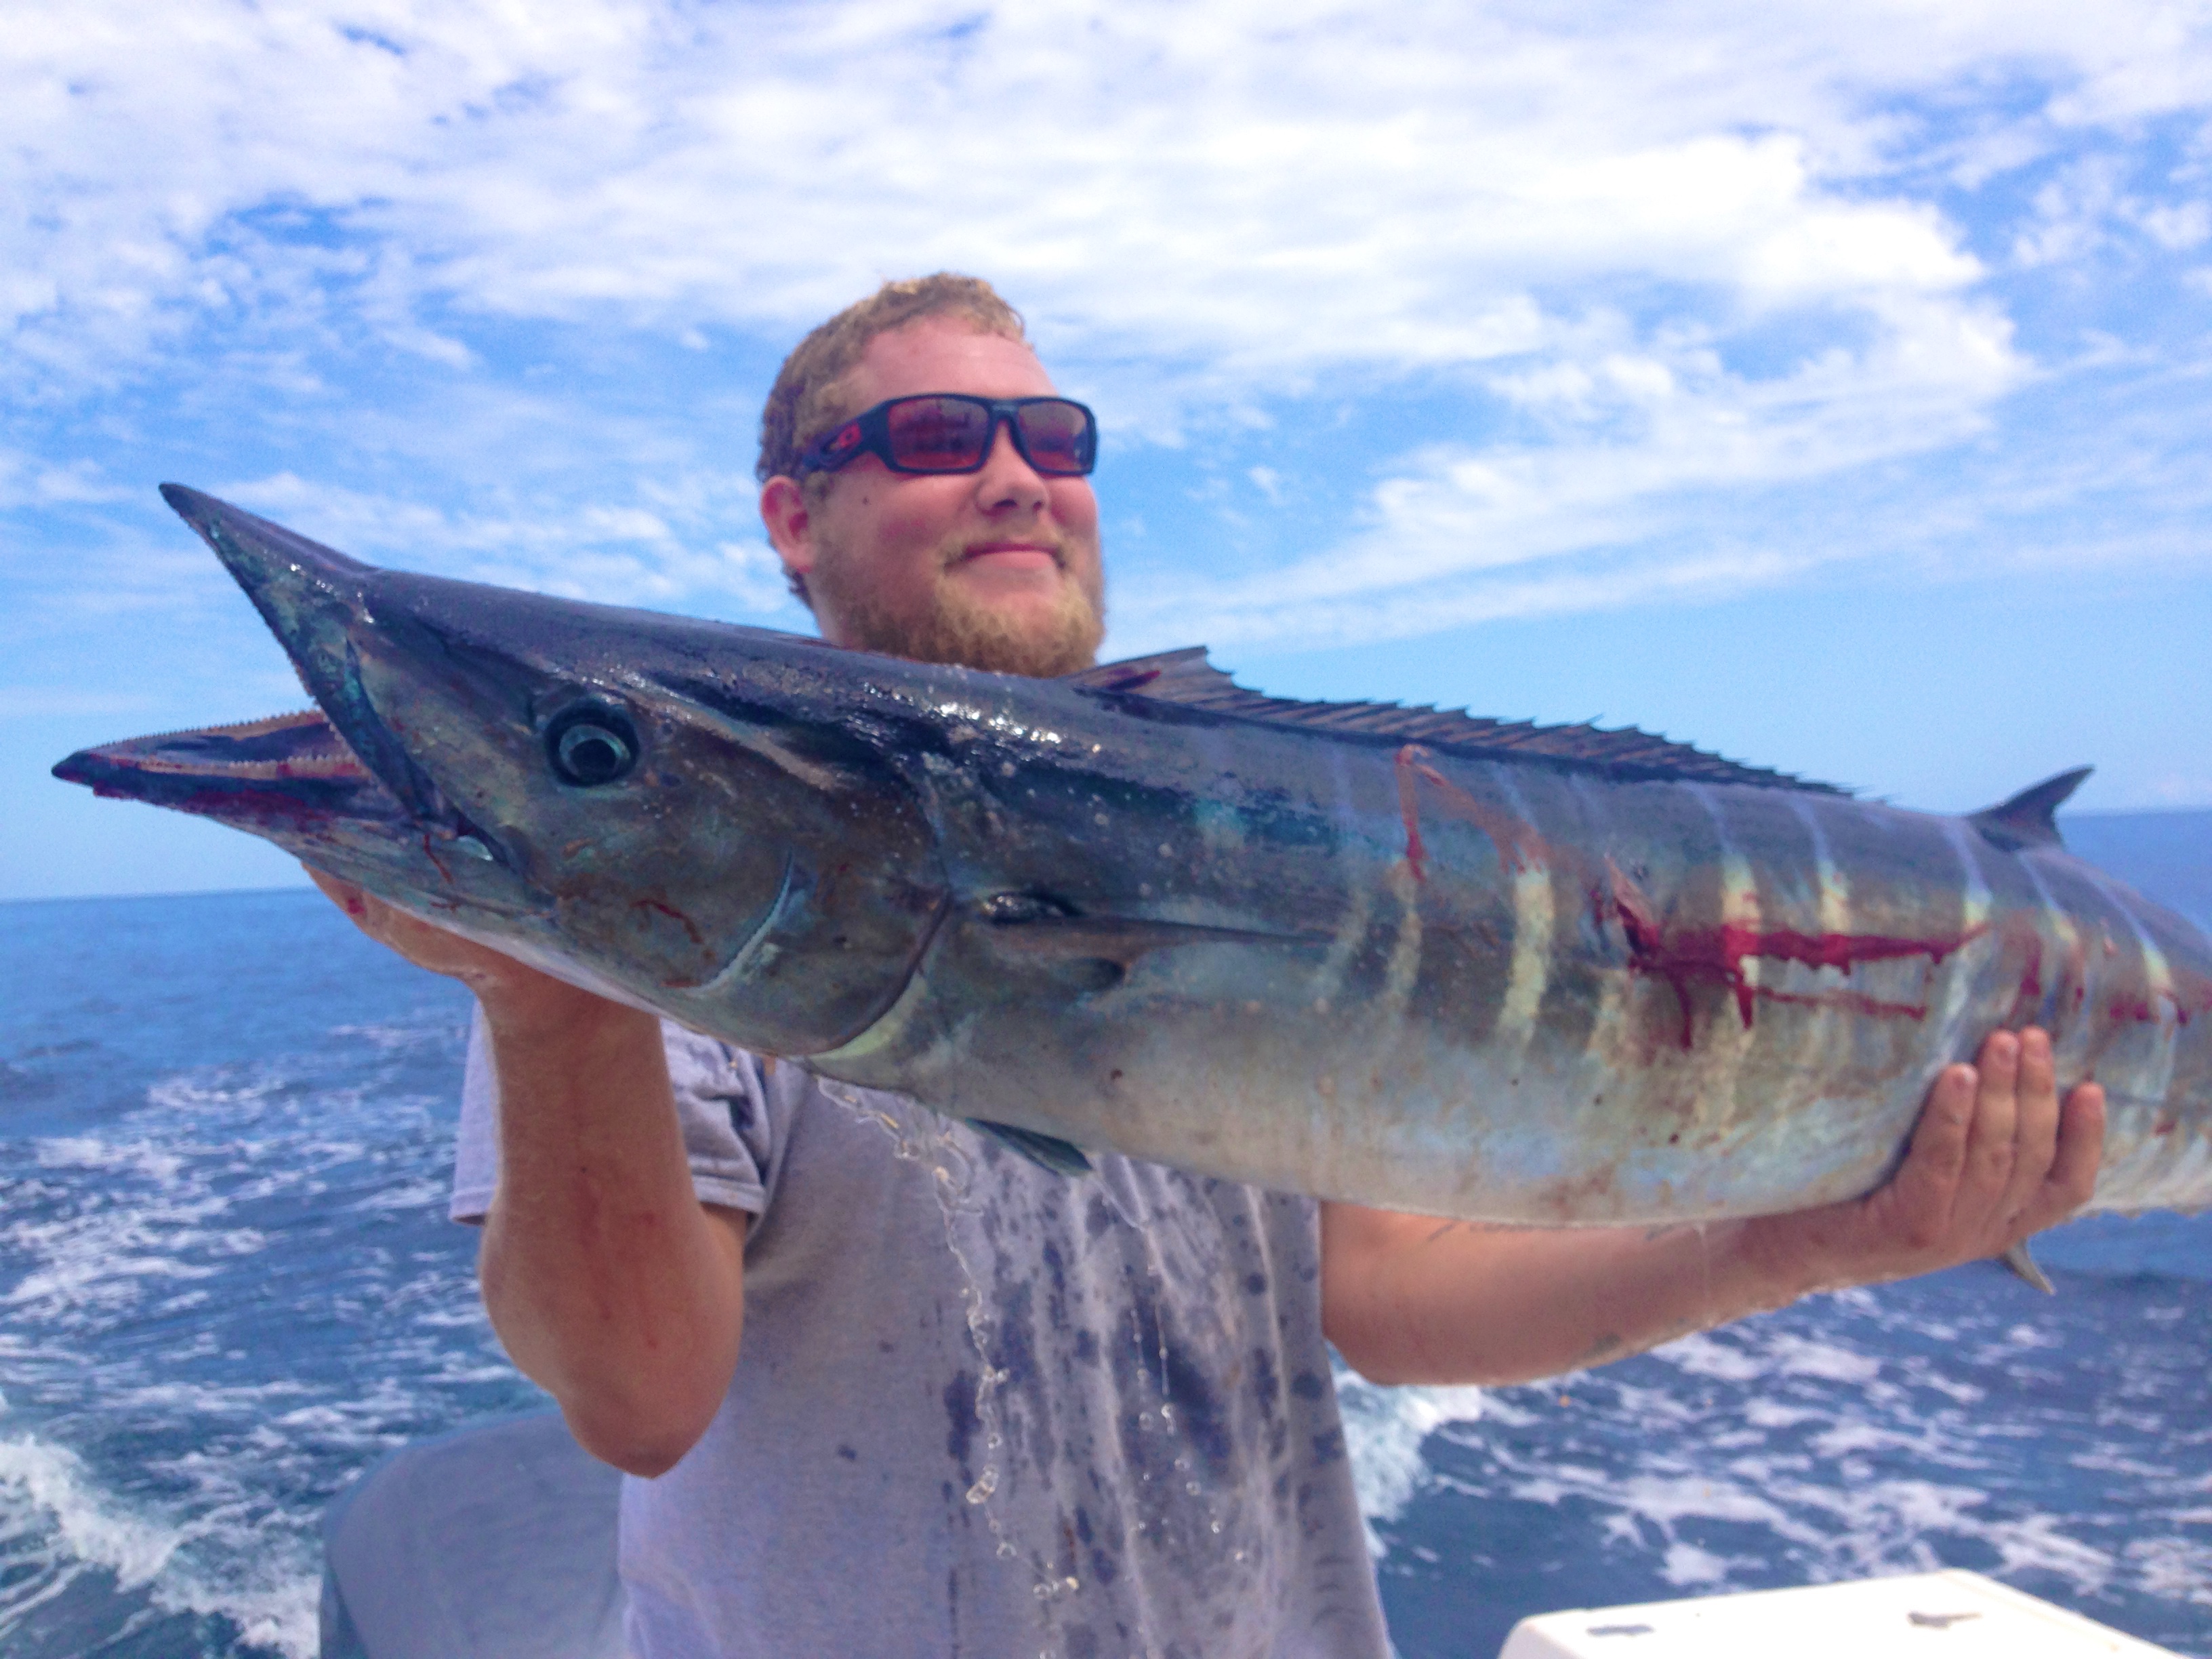 How to Fish for Wahoo Using Slow Trolling Speeds